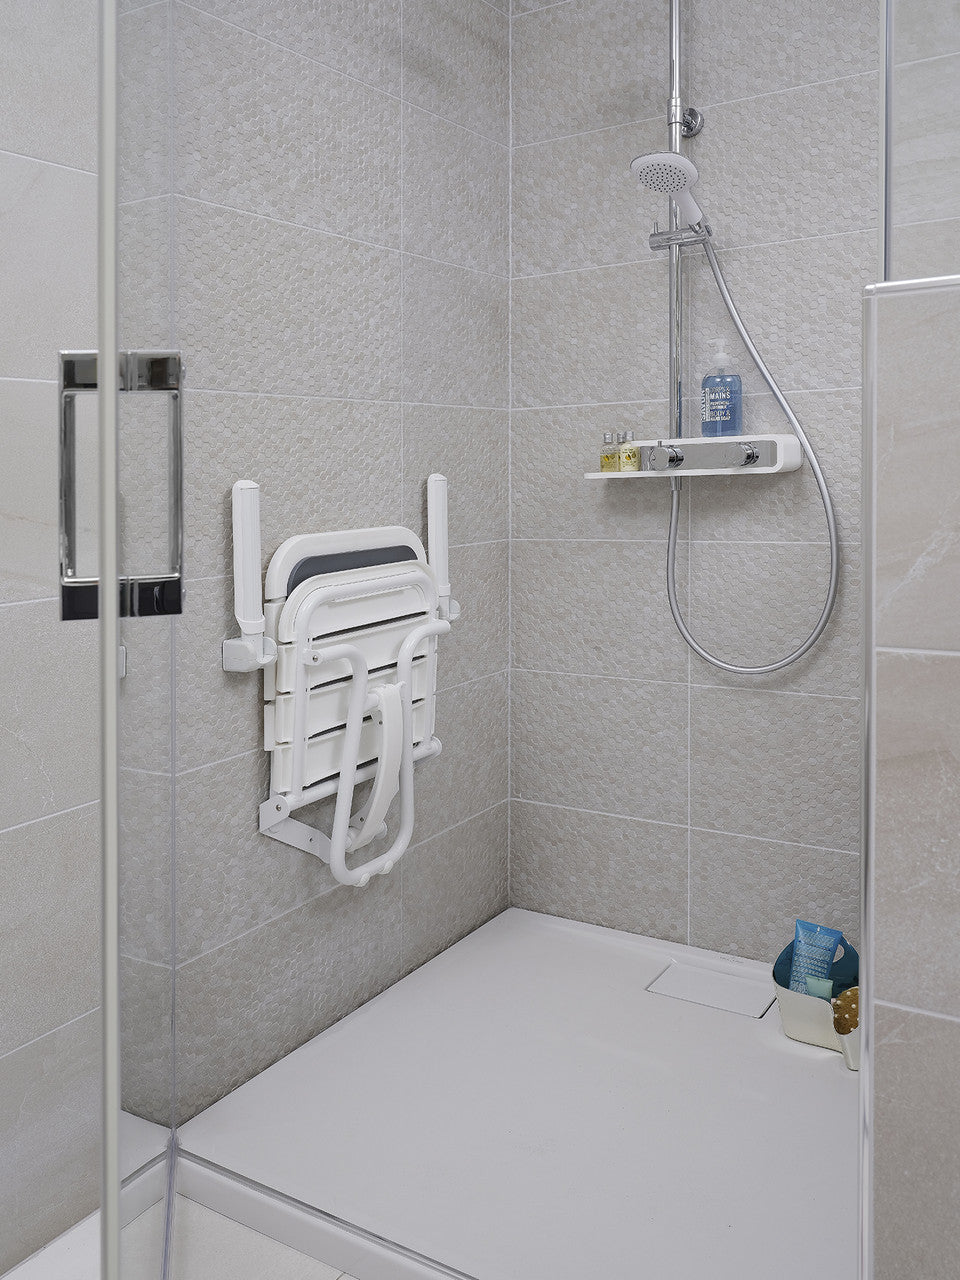 Comfortique wall mounted foldaway shower chair with back and arm rests